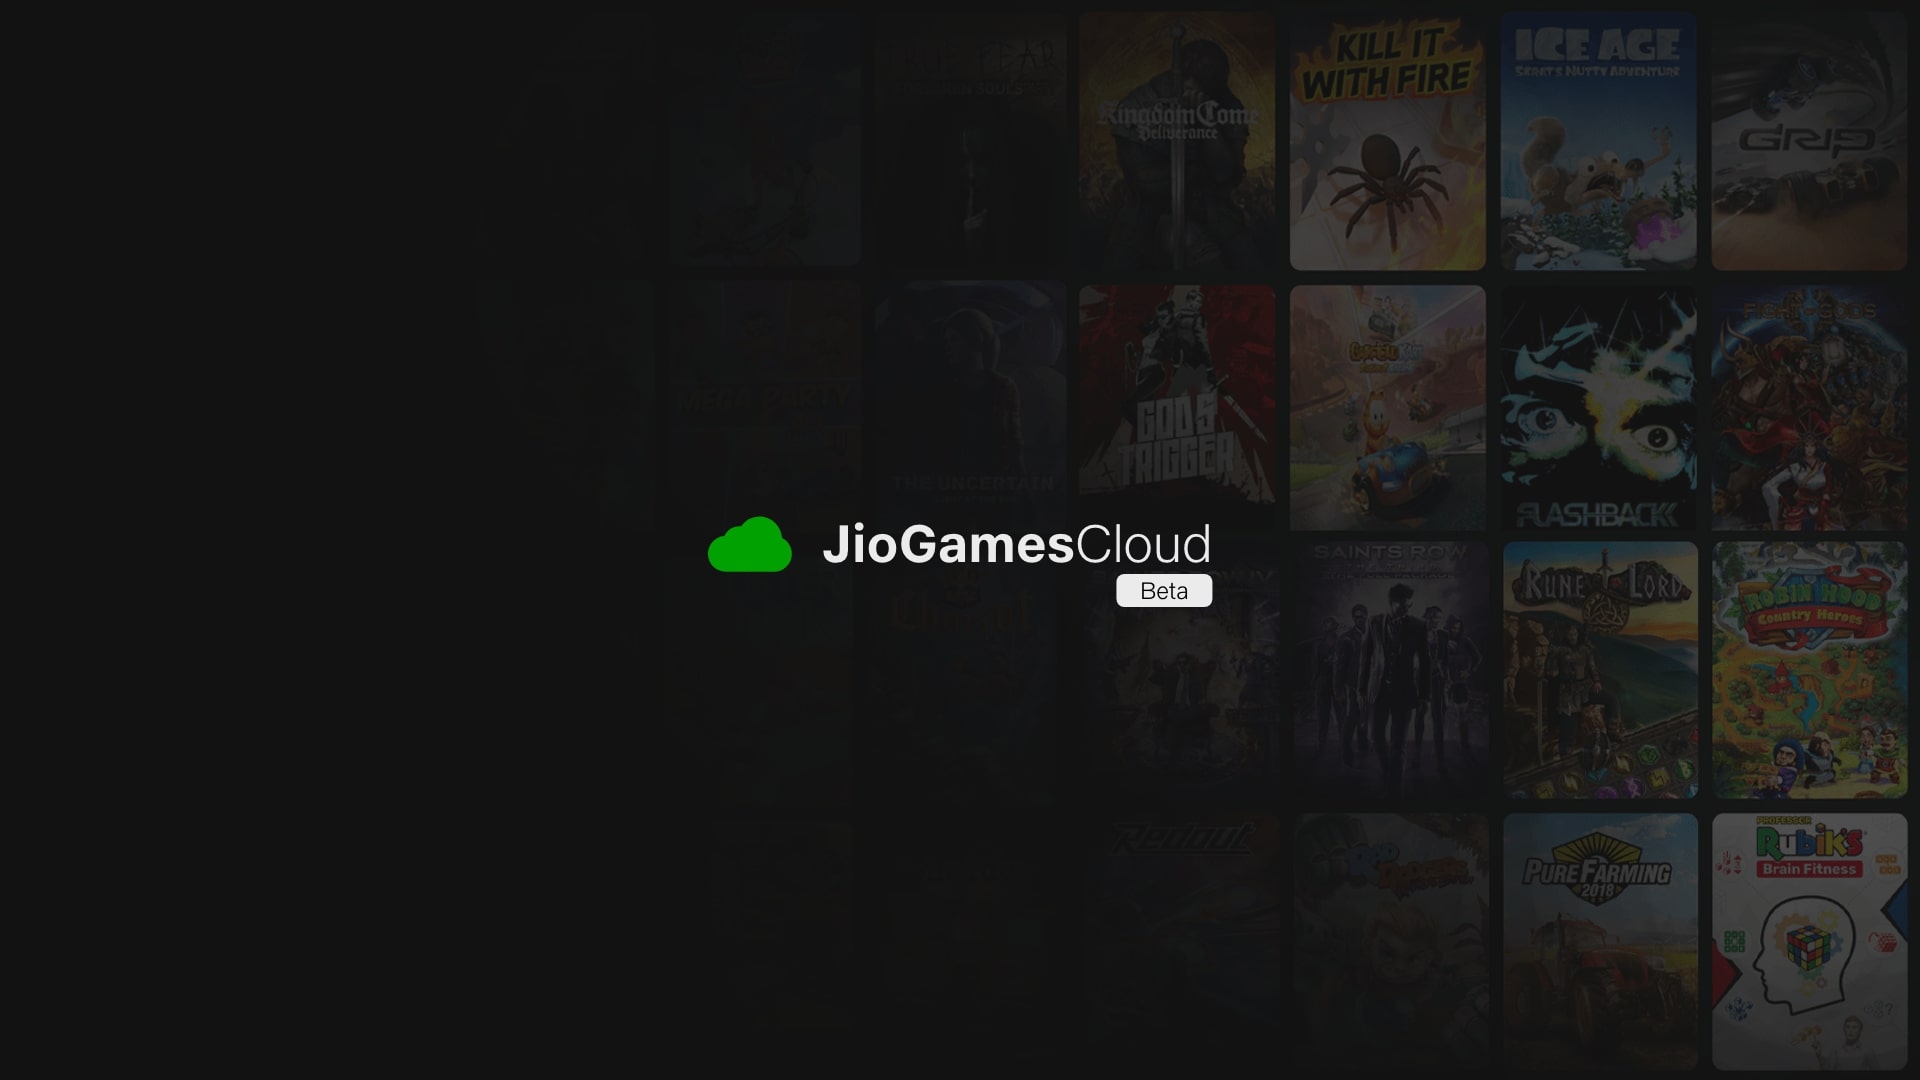 JioGamesCloud Launched in India With GeForce Now